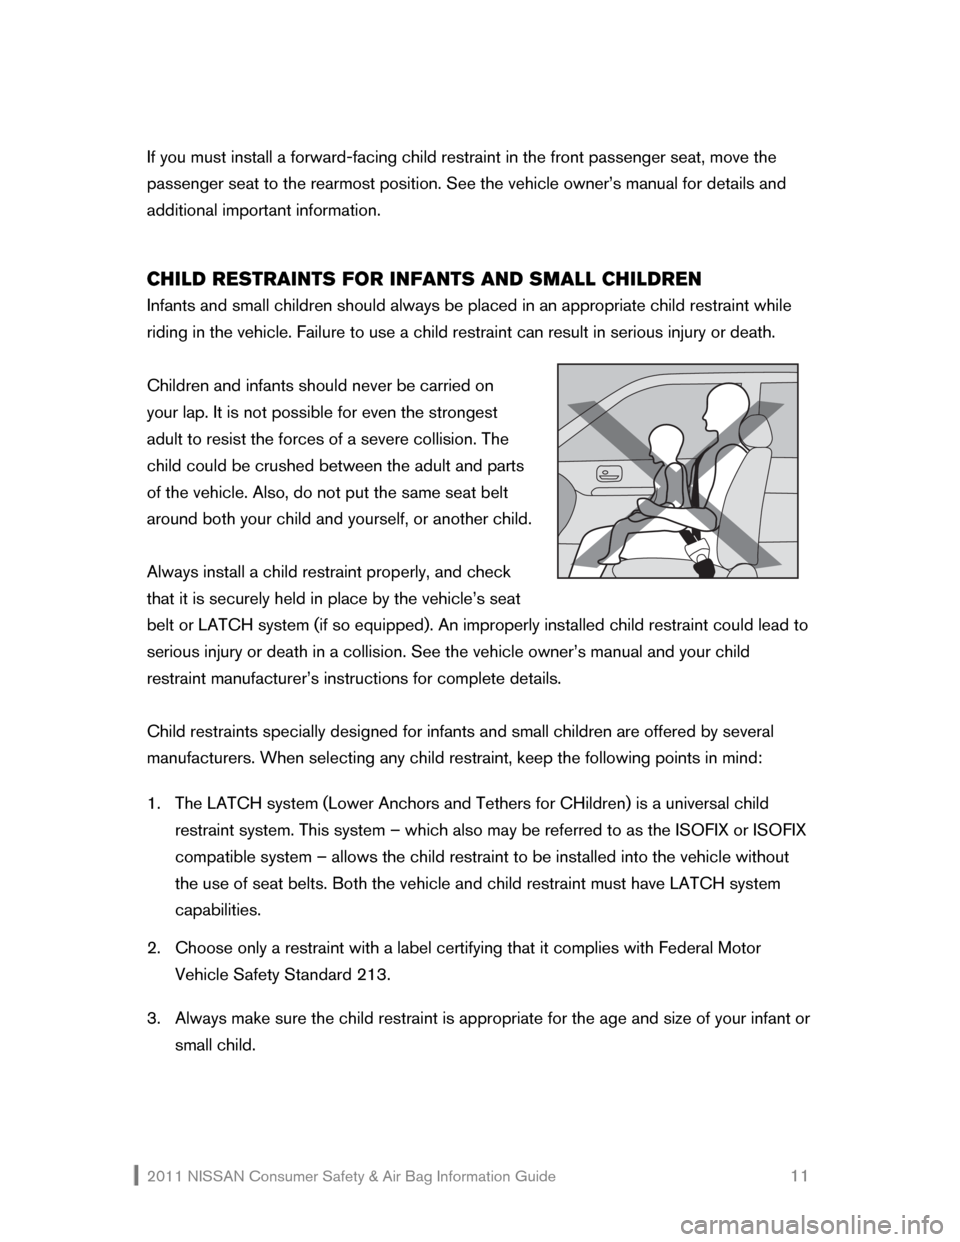 NISSAN ROGUE 2011 1.G Consumer Safety Air Bag Information Guide 2011 NISSAN Consumer Safety & Air Bag Information Guide                                                       11 
If you must install a forward-facing child restraint in the front passenger seat, move